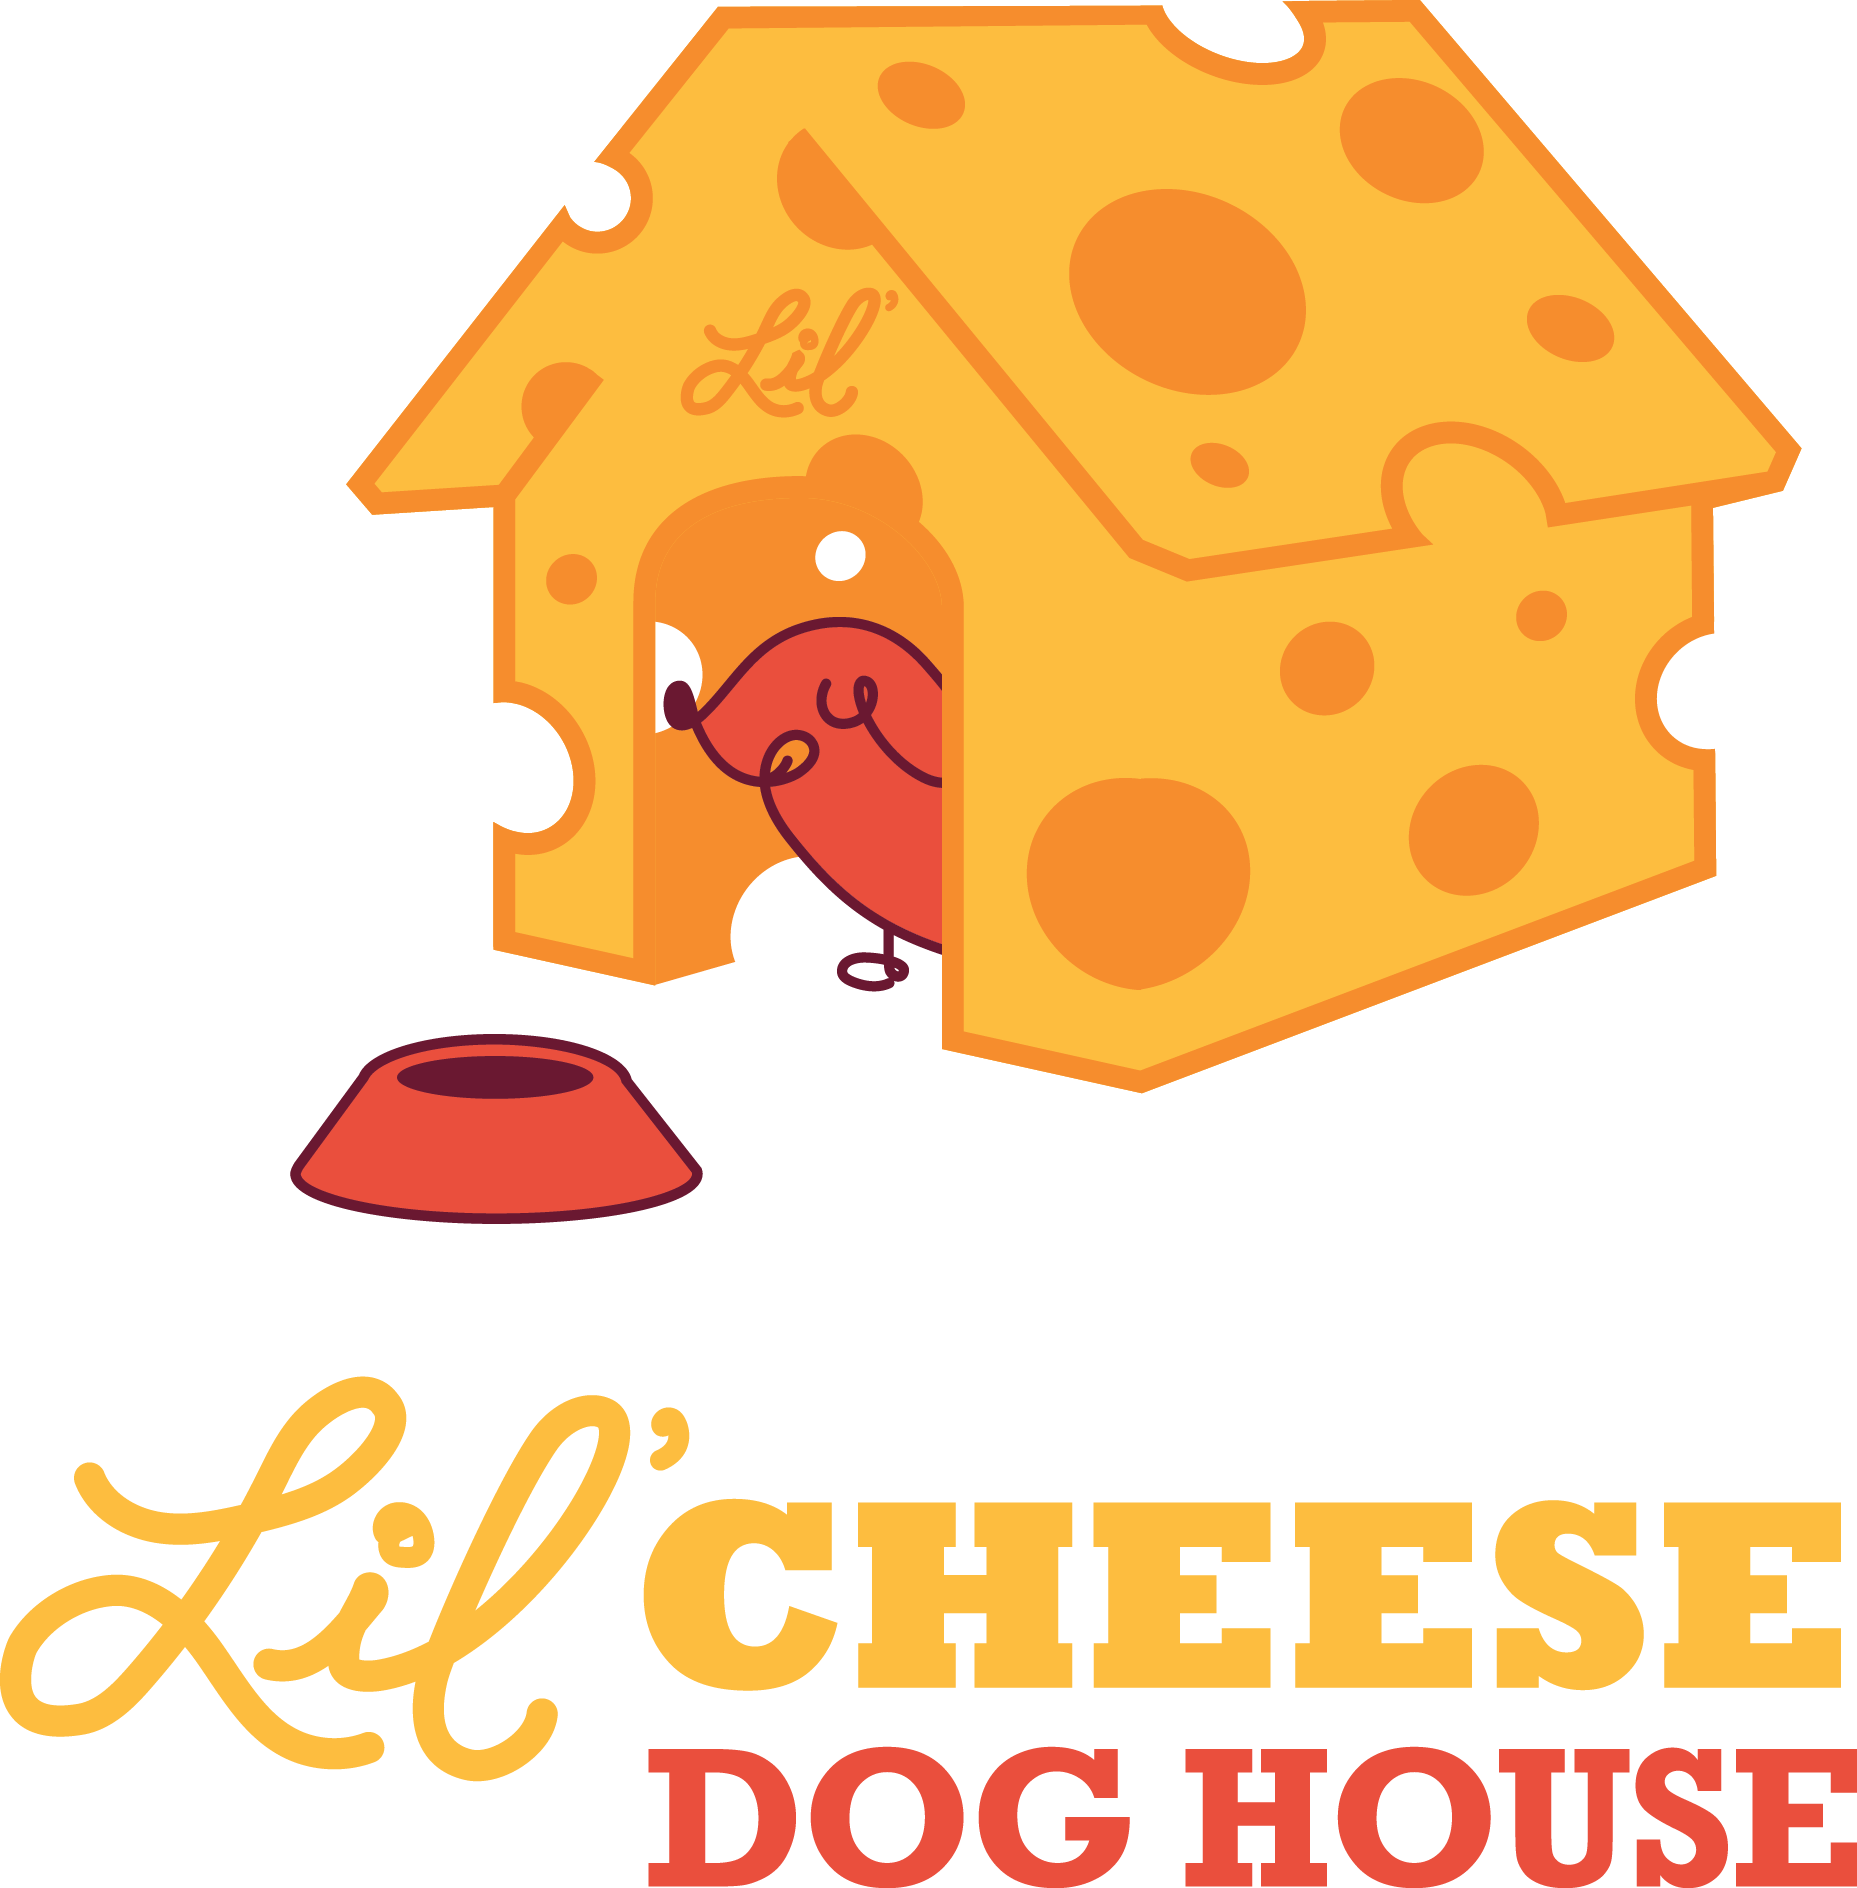 Local eats golden center. Doghouse clipart house traditional japanese